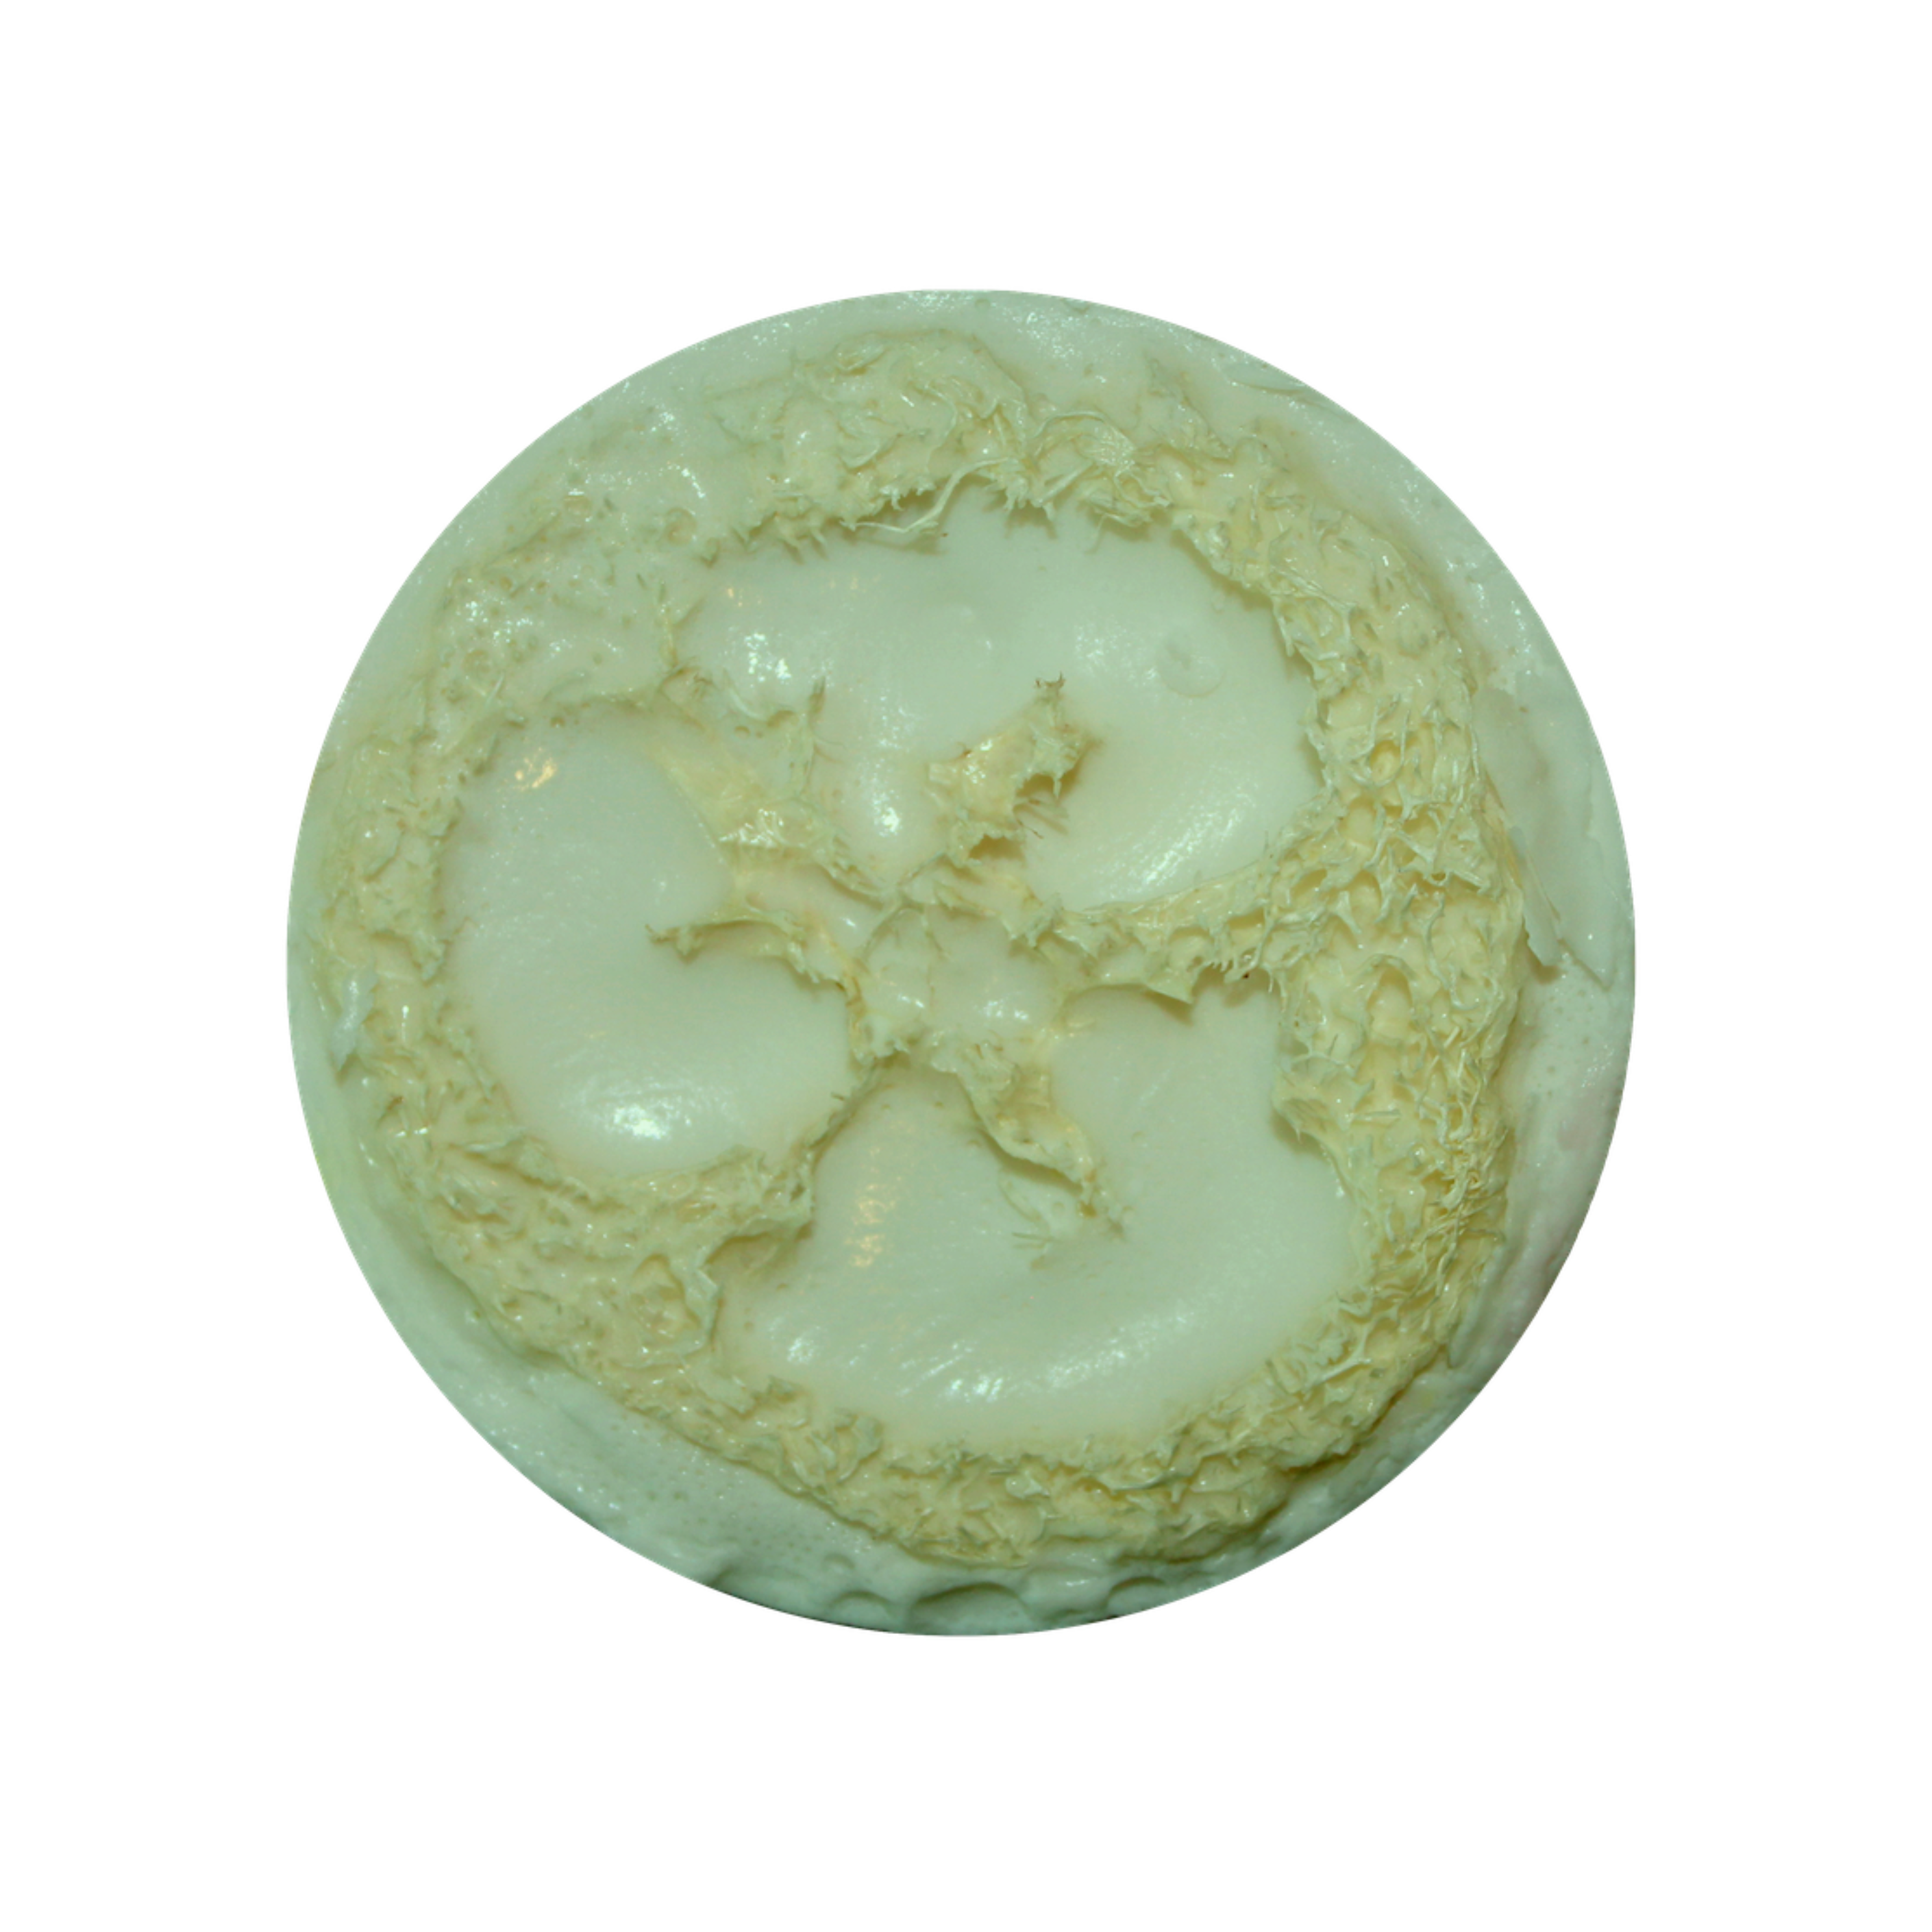 fresh lemongrass loofah soap is a great sustainable beauty product option for your spa &amp;salon. It made with natural biodegradable loofah with soap, making it a convenient daily exfoliator for dry to normal skin. 